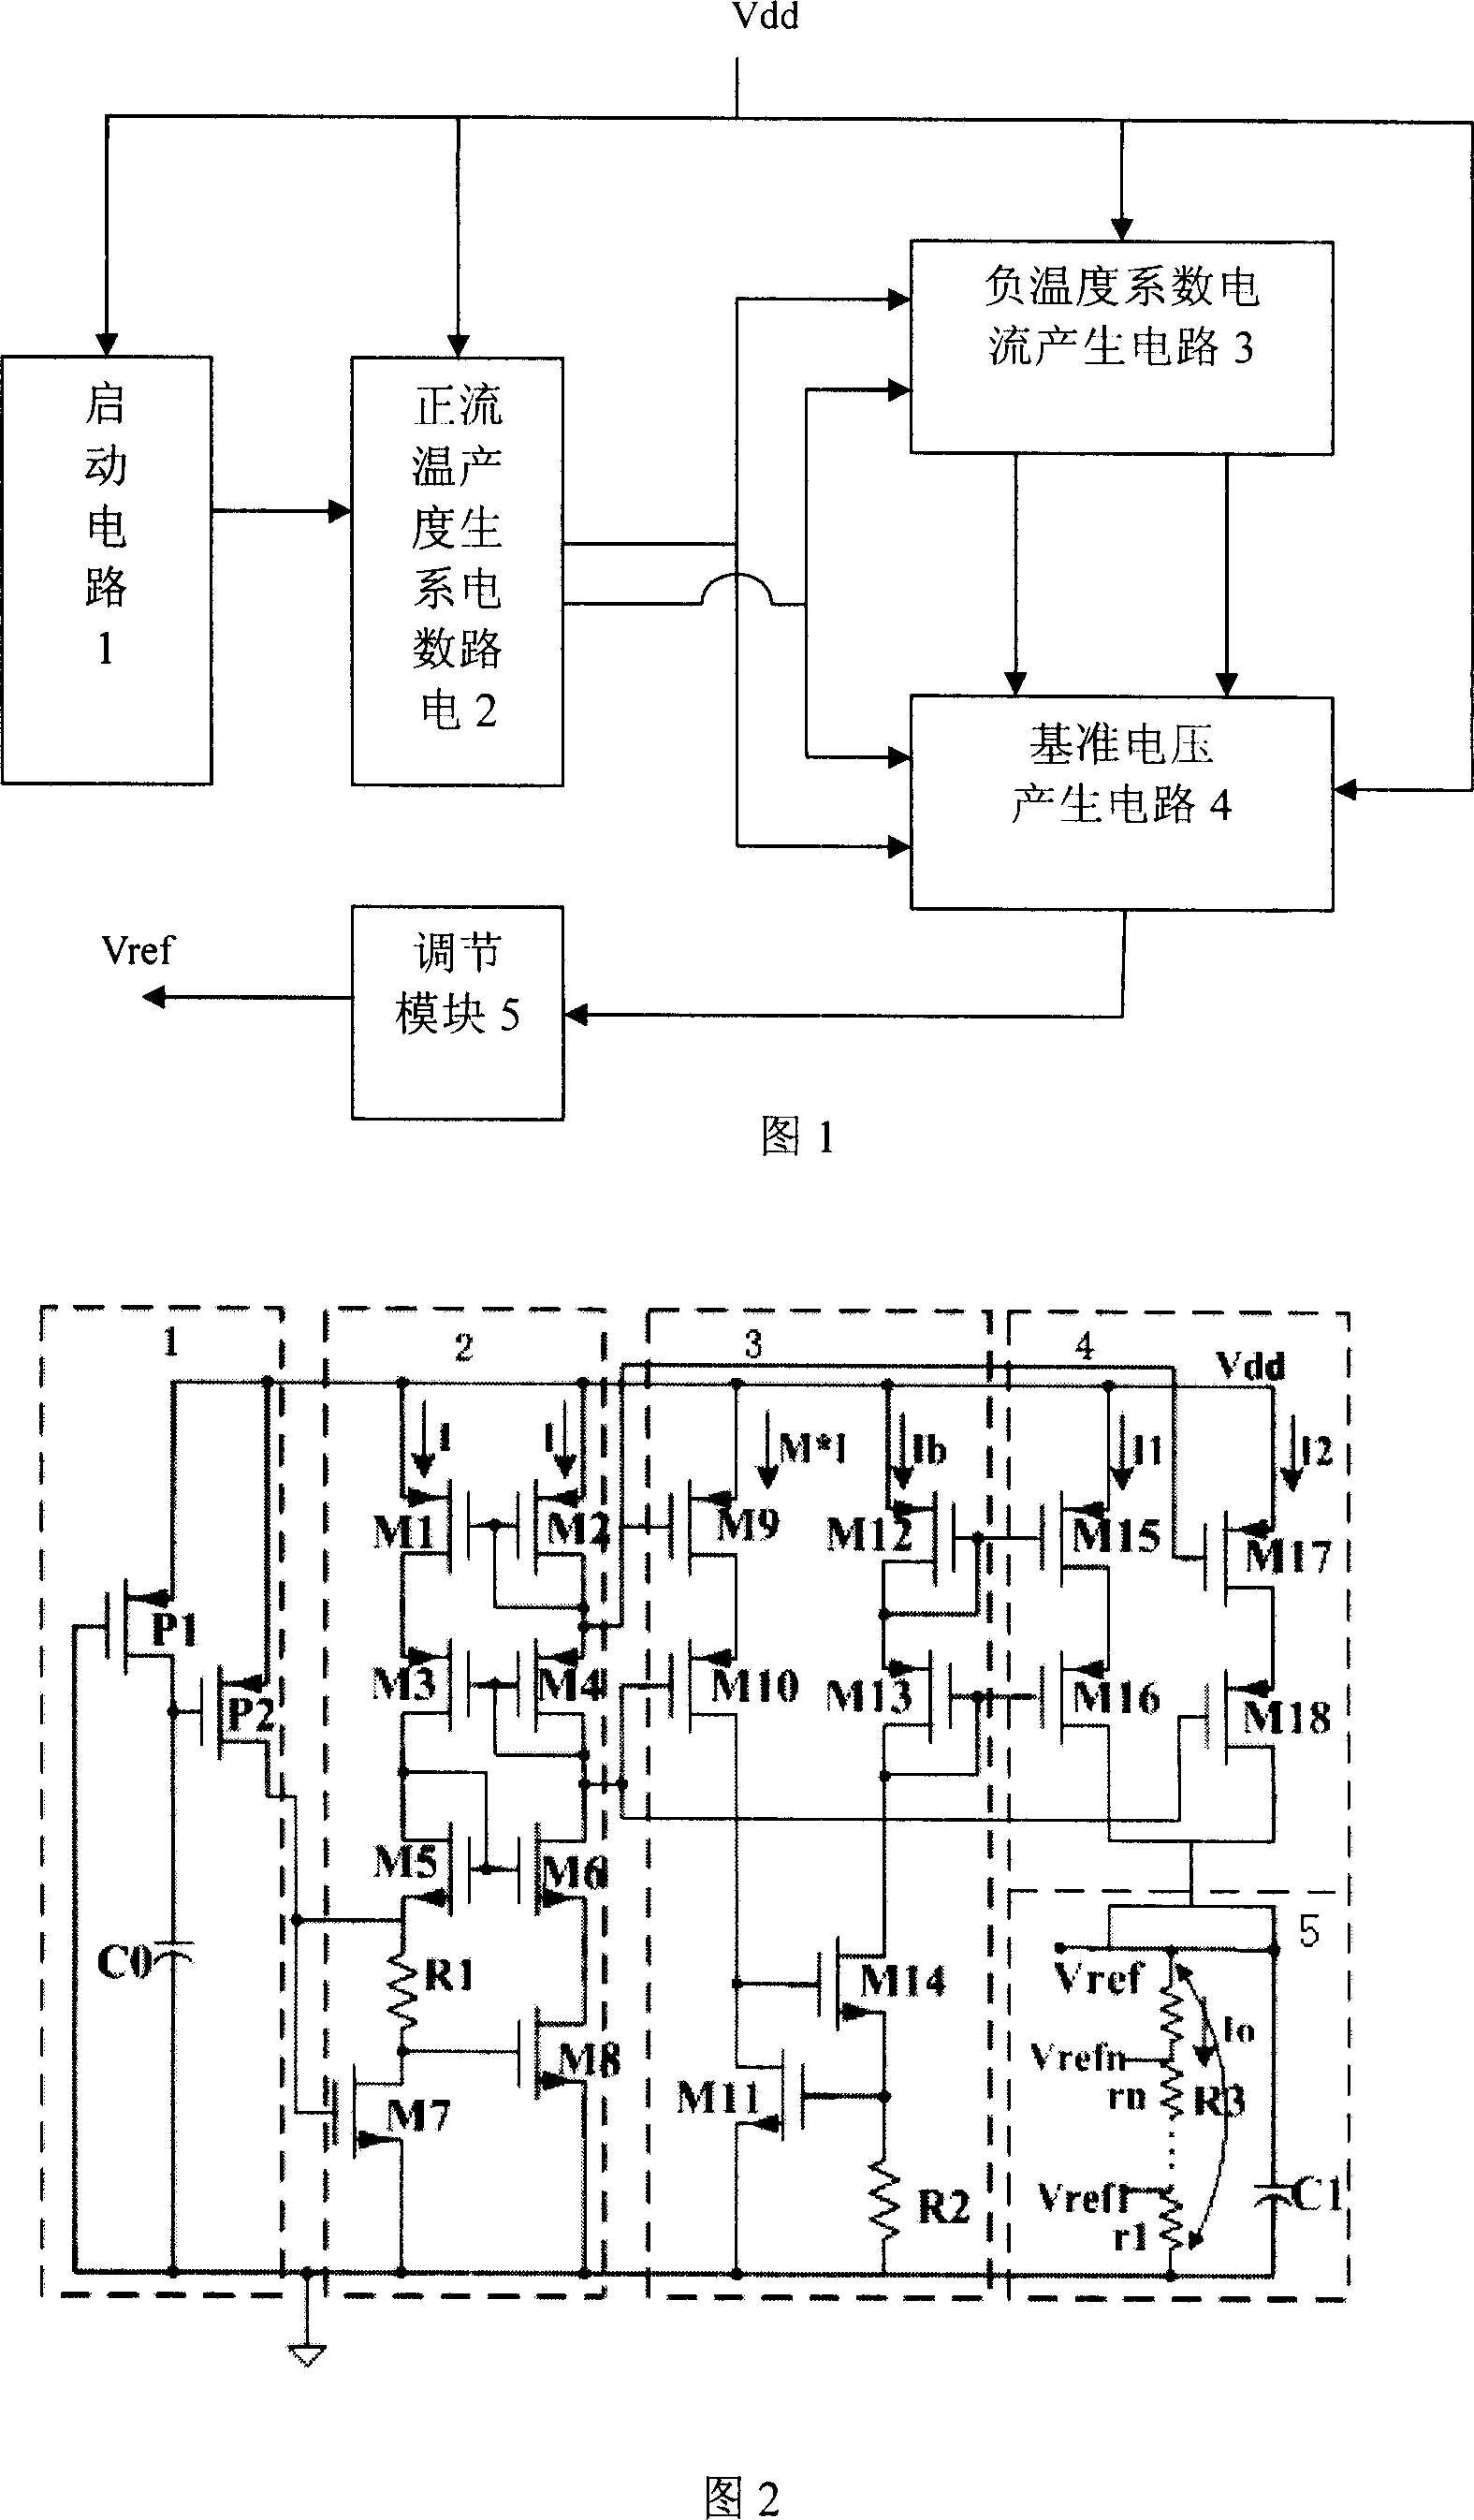 CMOS reference voltage source with adjustable output voltage